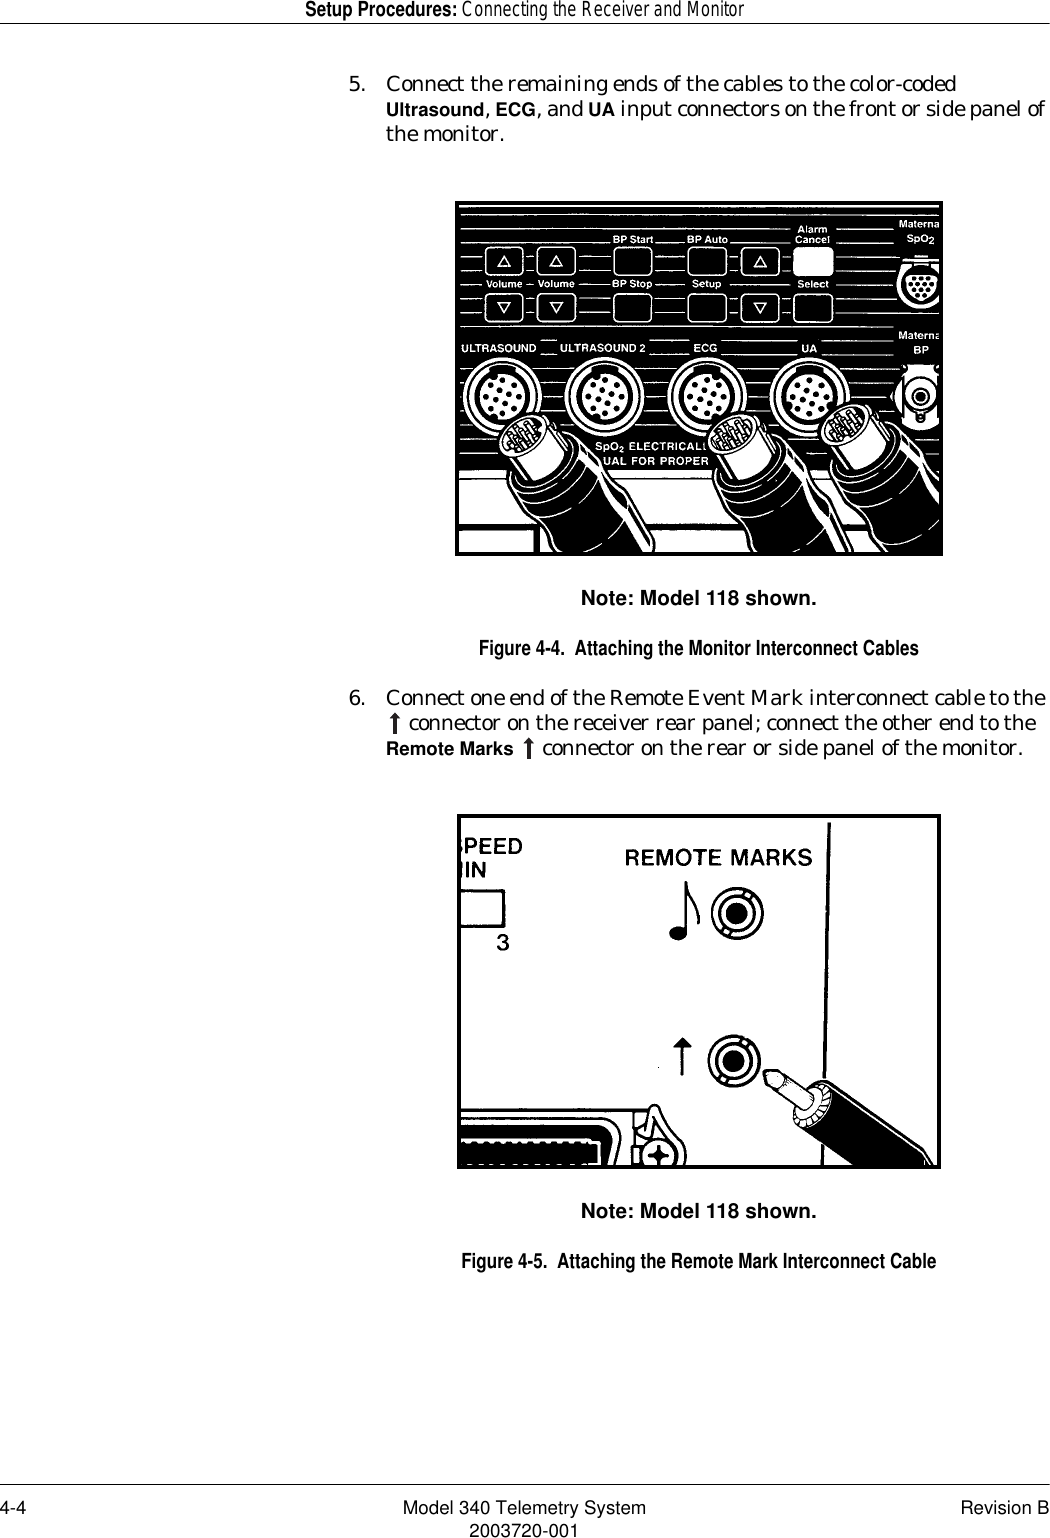 4-4 Model 340 Telemetry System Revision B2003720-001Setup Procedures: Connecting the Receiver and Monitor5. Connect the remaining ends of the cables to the color-coded Ultrasound, ECG, and UA input connectors on the front or side panel of the monitor.Note: Model 118 shown.Figure 4-4.  Attaching the Monitor Interconnect Cables6. Connect one end of the Remote Event Mark interconnect cable to the  connector on the receiver rear panel; connect the other end to the Remote Marks   connector on the rear or side panel of the monitor.Note: Model 118 shown.Figure 4-5.  Attaching the Remote Mark Interconnect Cable